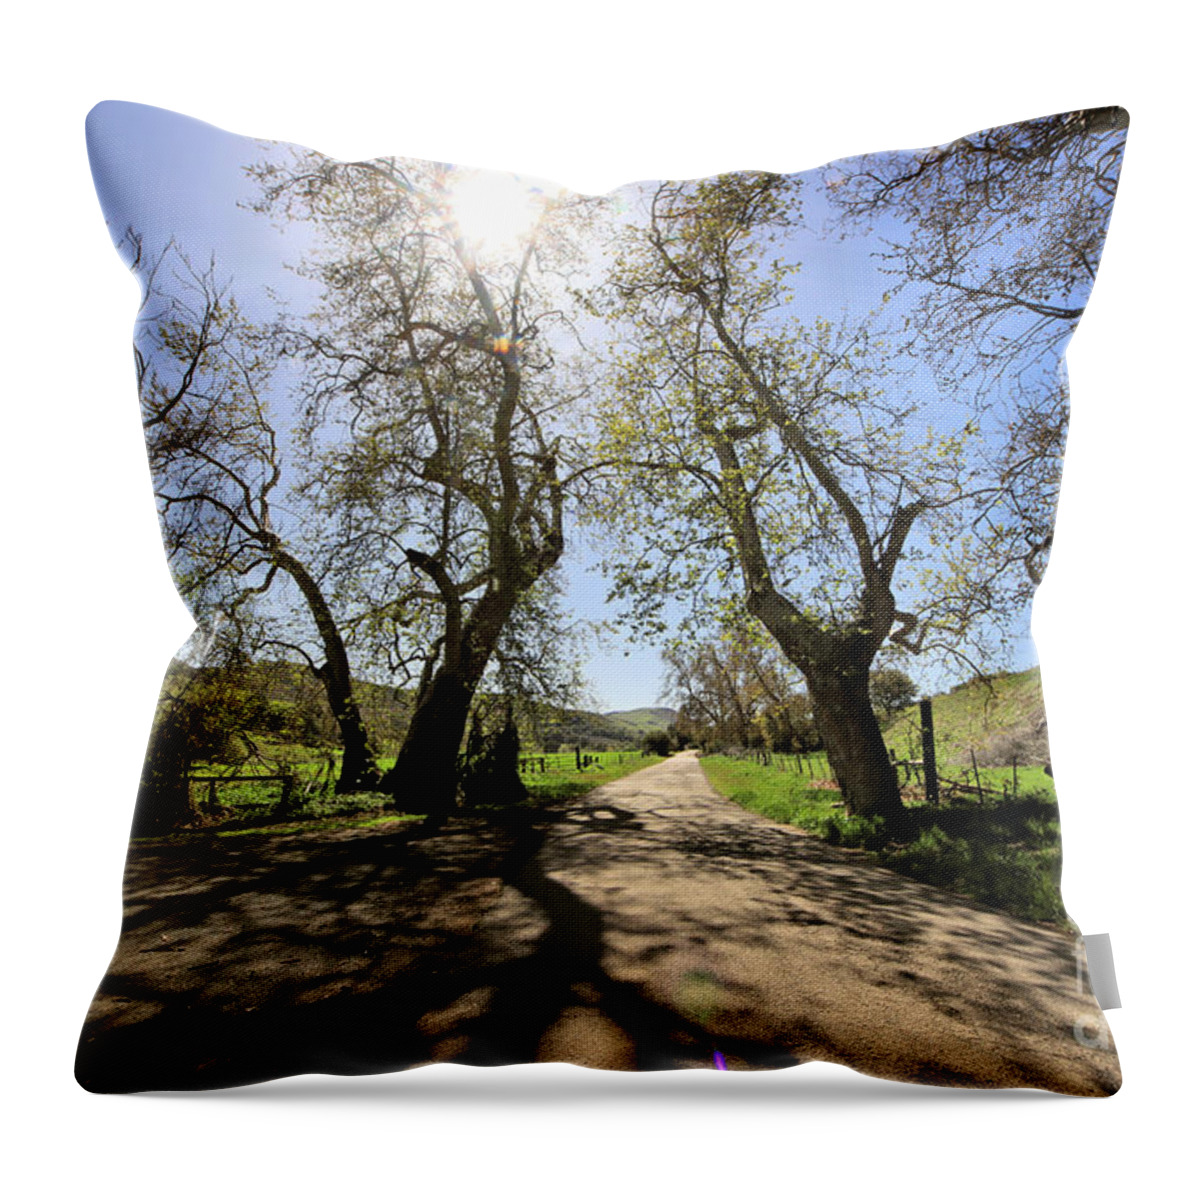 Road Throw Pillow featuring the photograph Country Roads by Vivian Krug Cotton